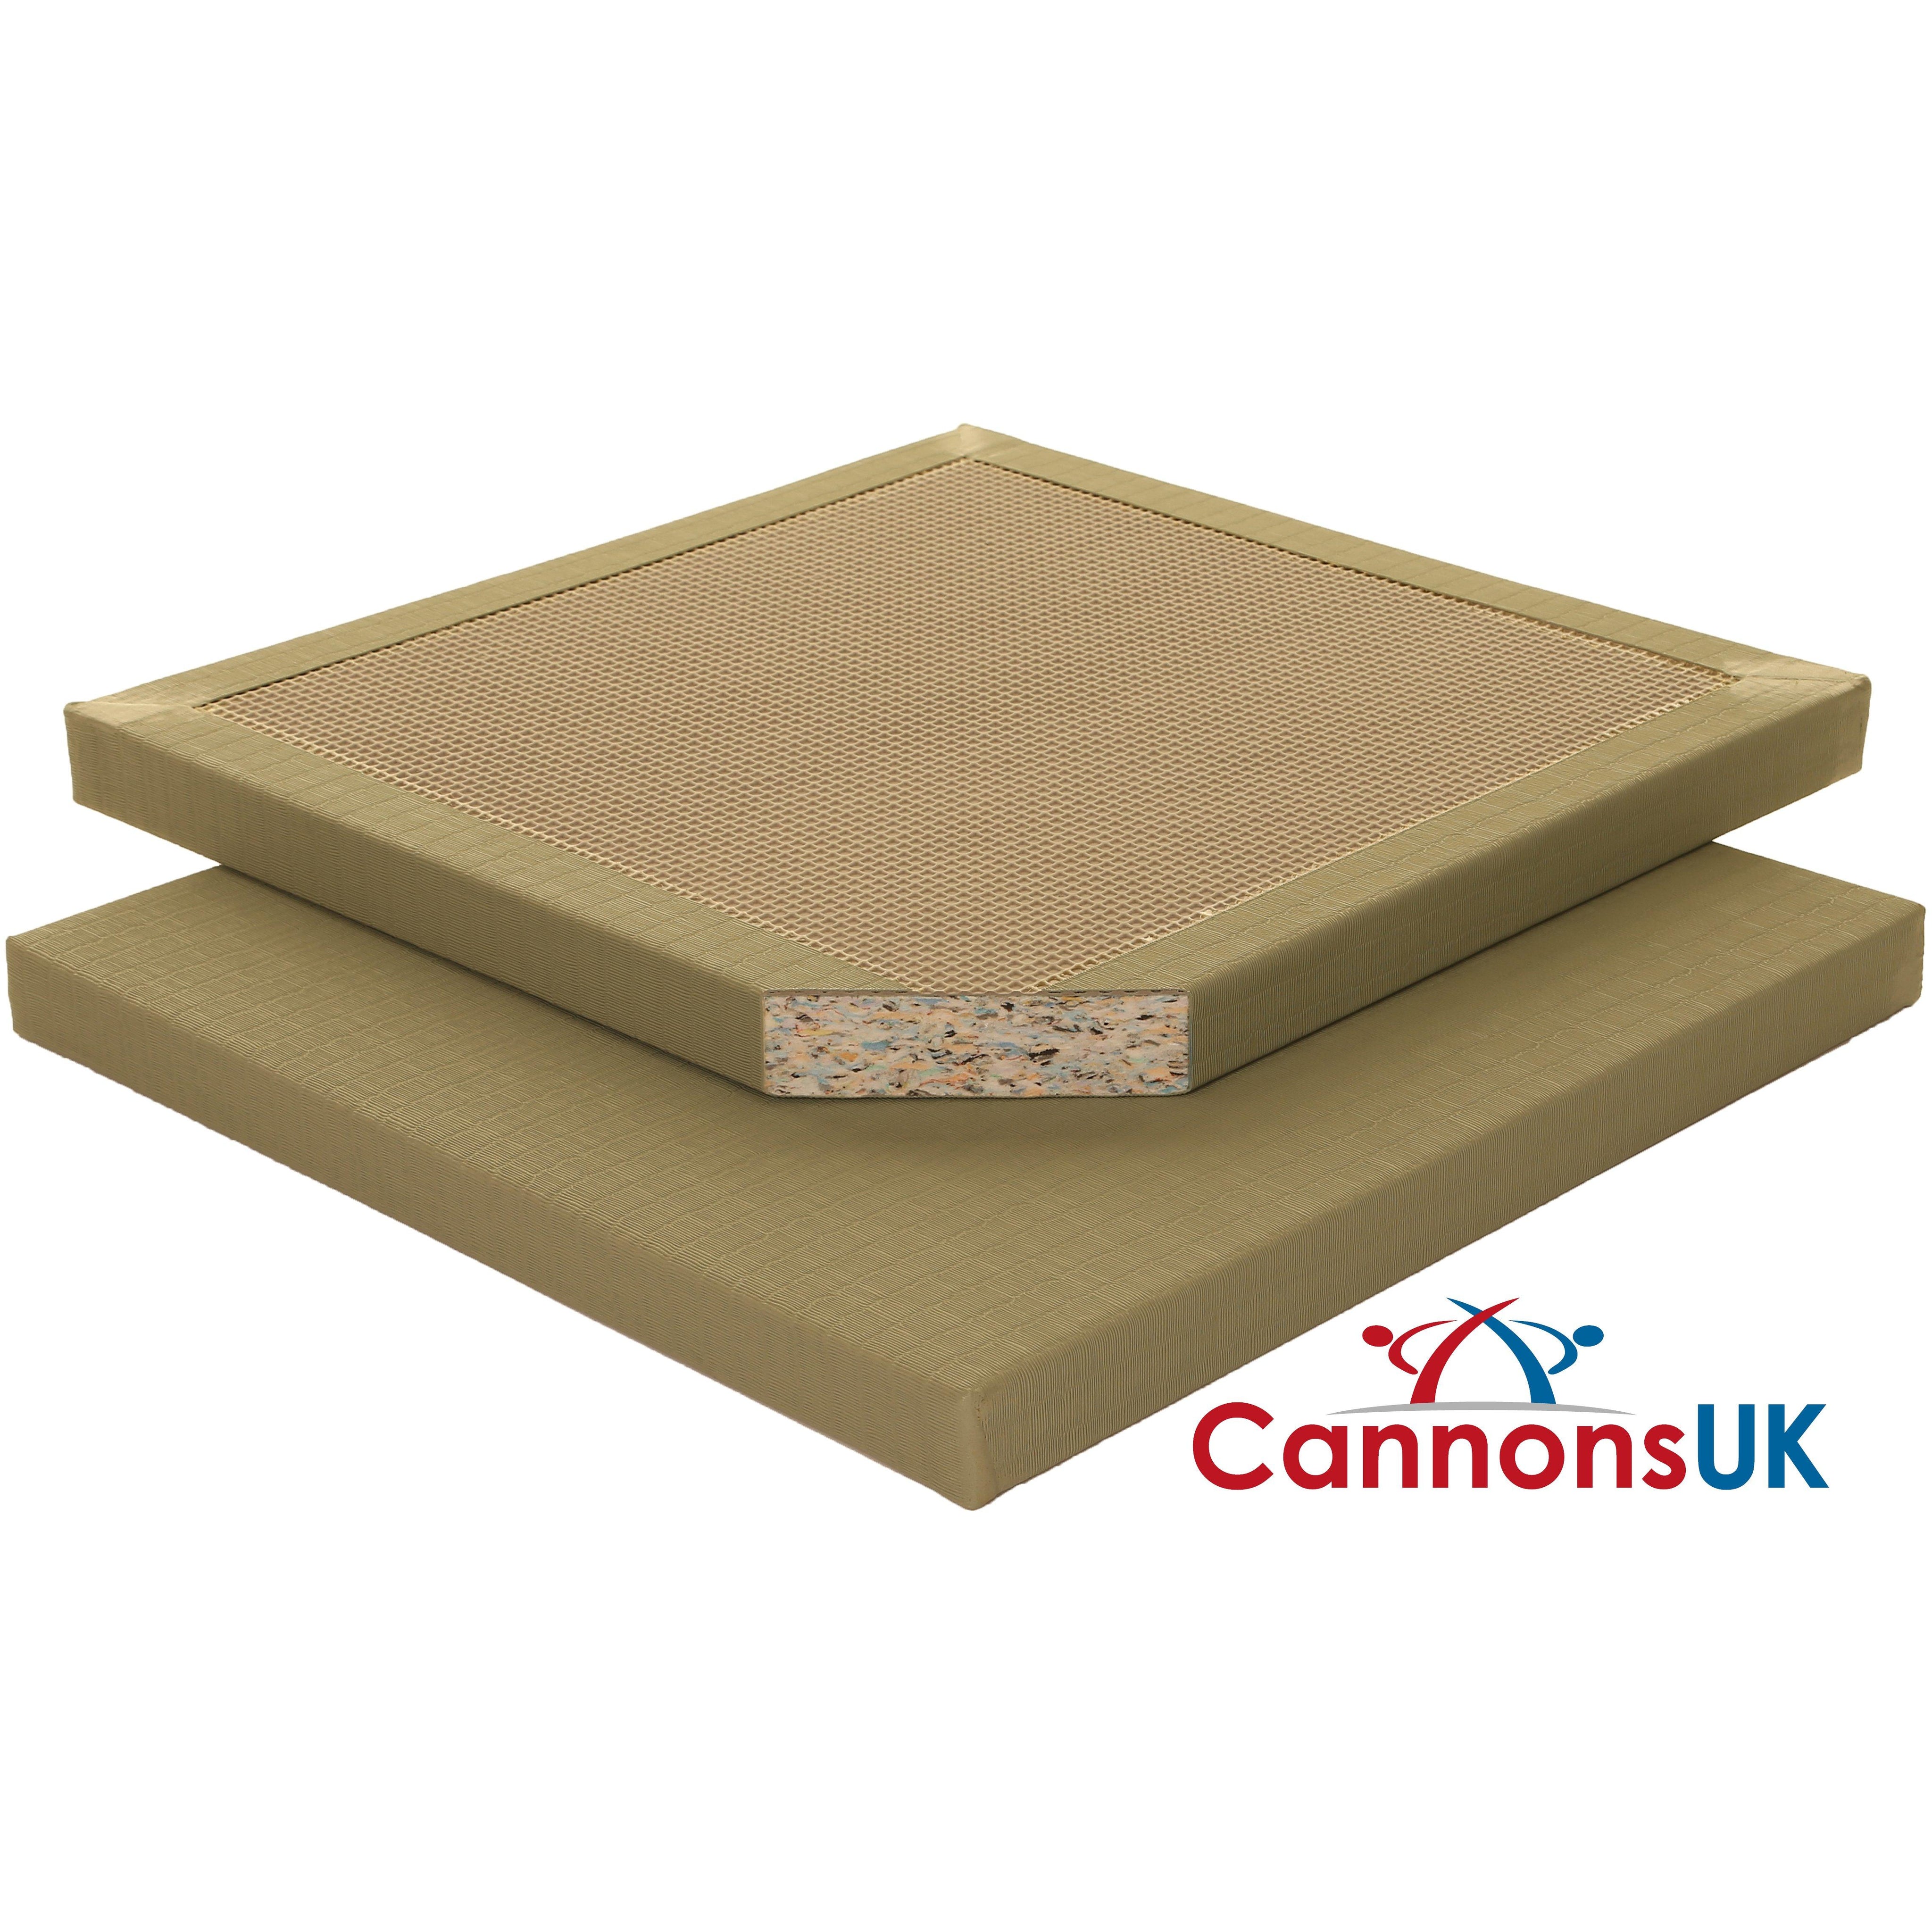 Cannons UK Contest Judo Mats 1m x 1m x 40mm - Cannons UK